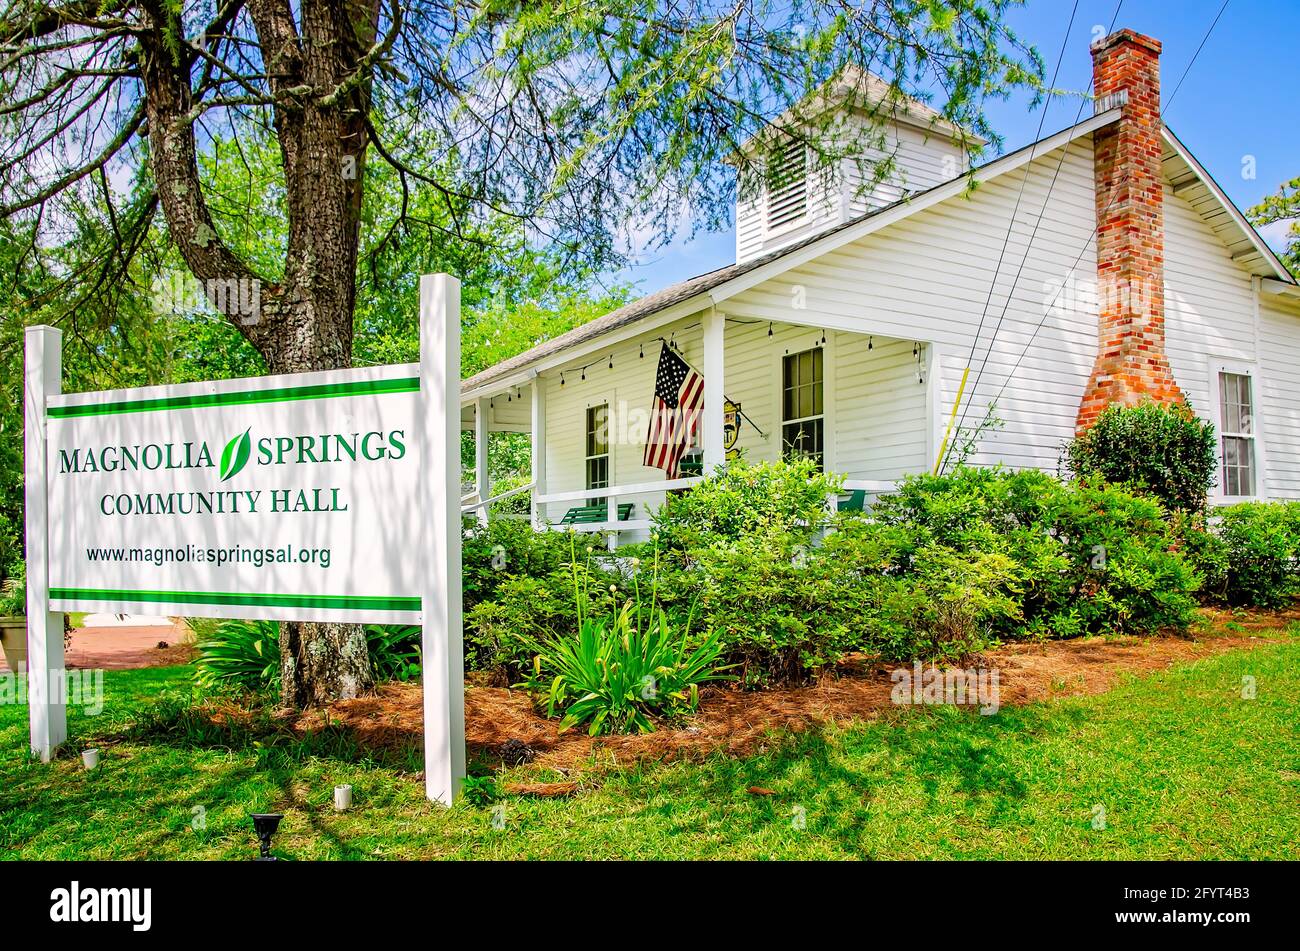 Magnolia Springs Community Hall is pictured, May 27, 2021, in Magnolia Springs, Alabama. The house was built in 1894. Stock Photo